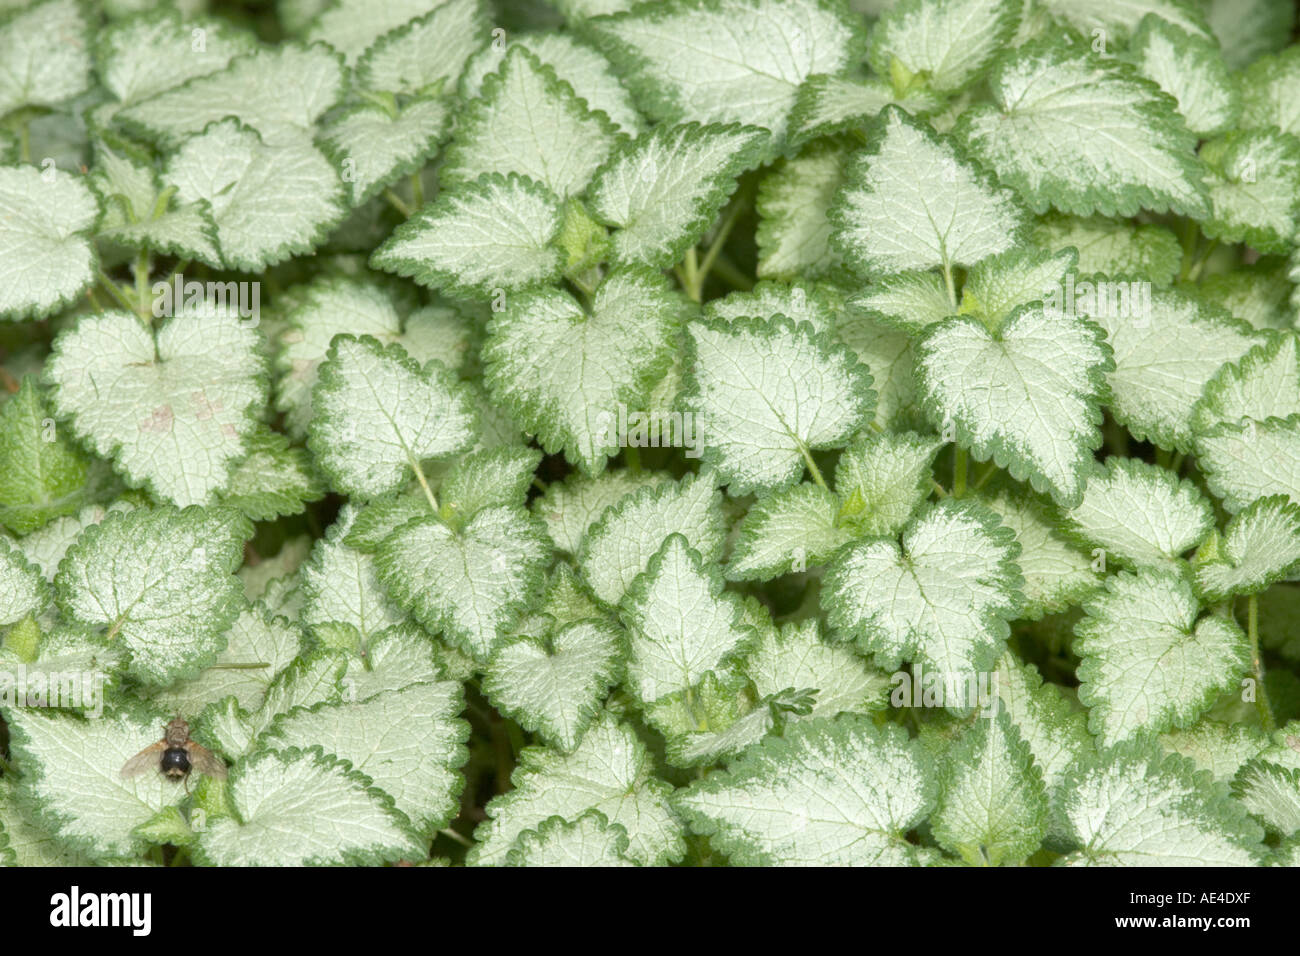 Triangular patterns formed by dead nettle leaves Stock Photo